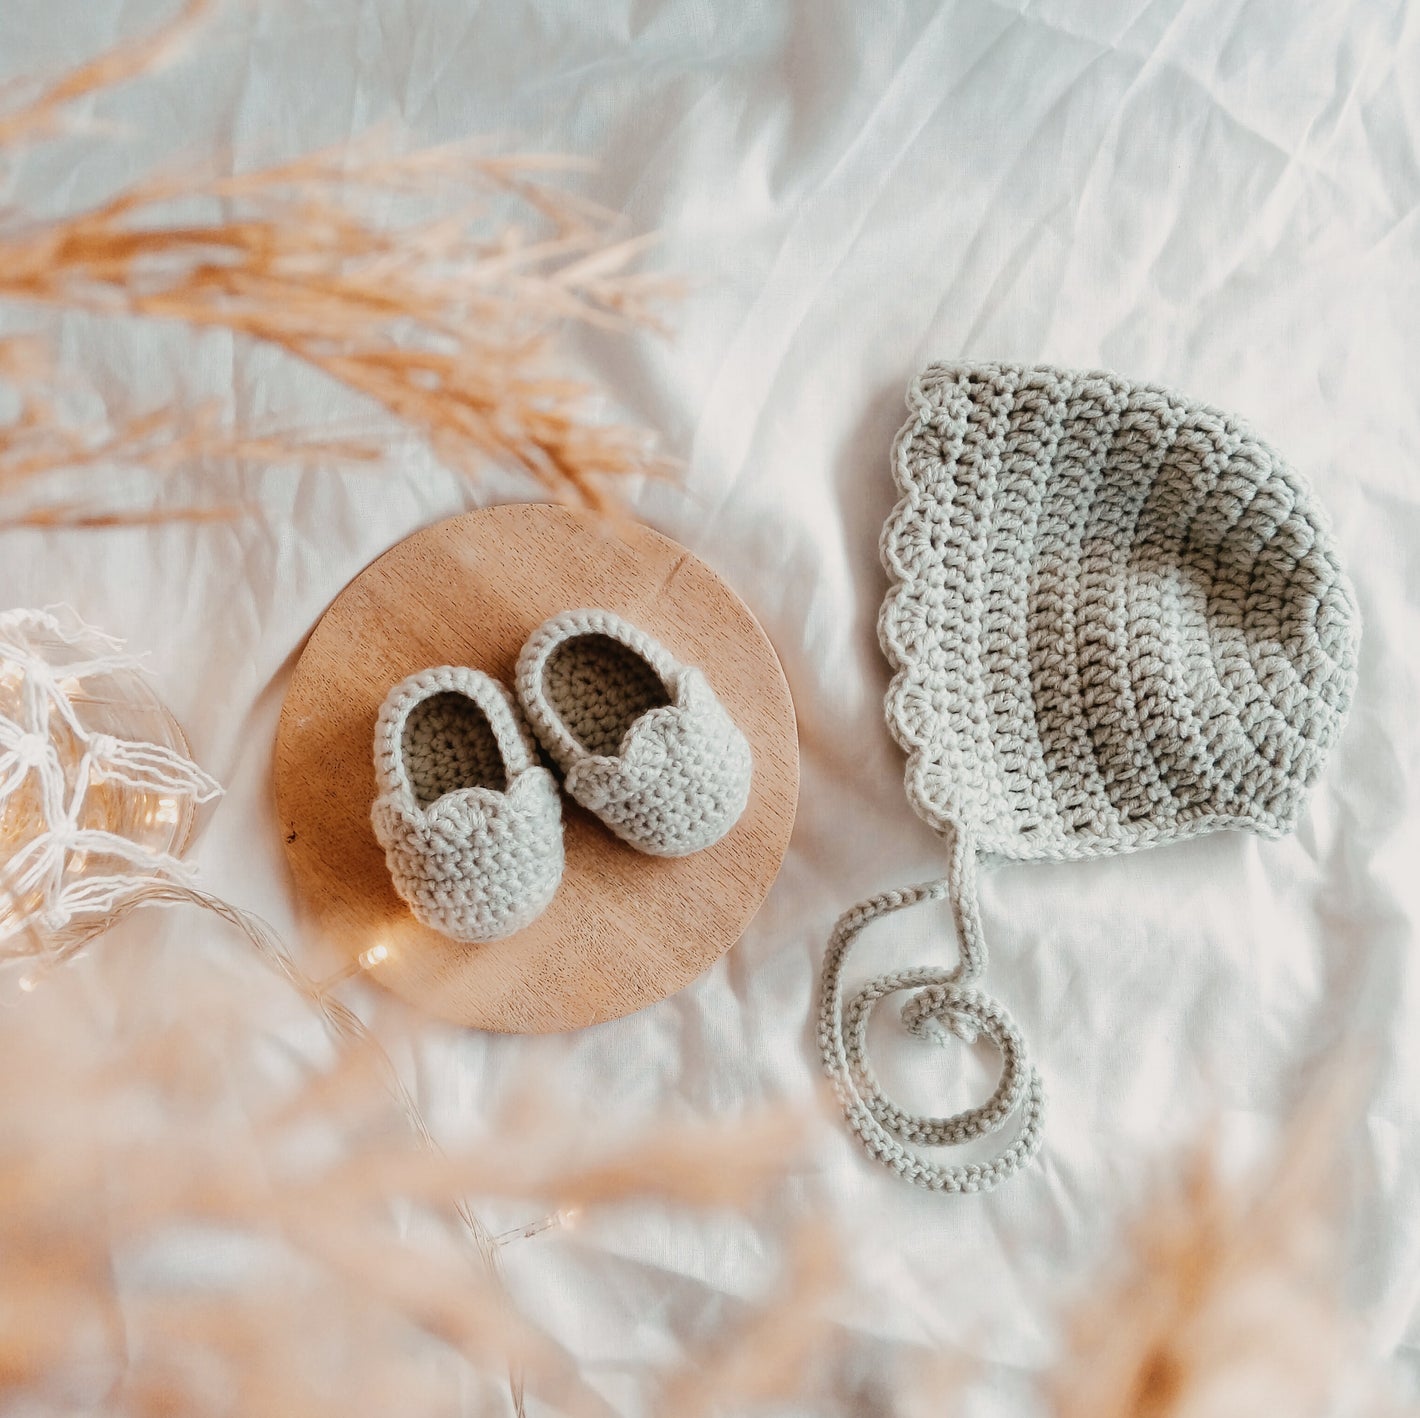 Crochet baby booties and crochet bonnet on the beautiful neutral background